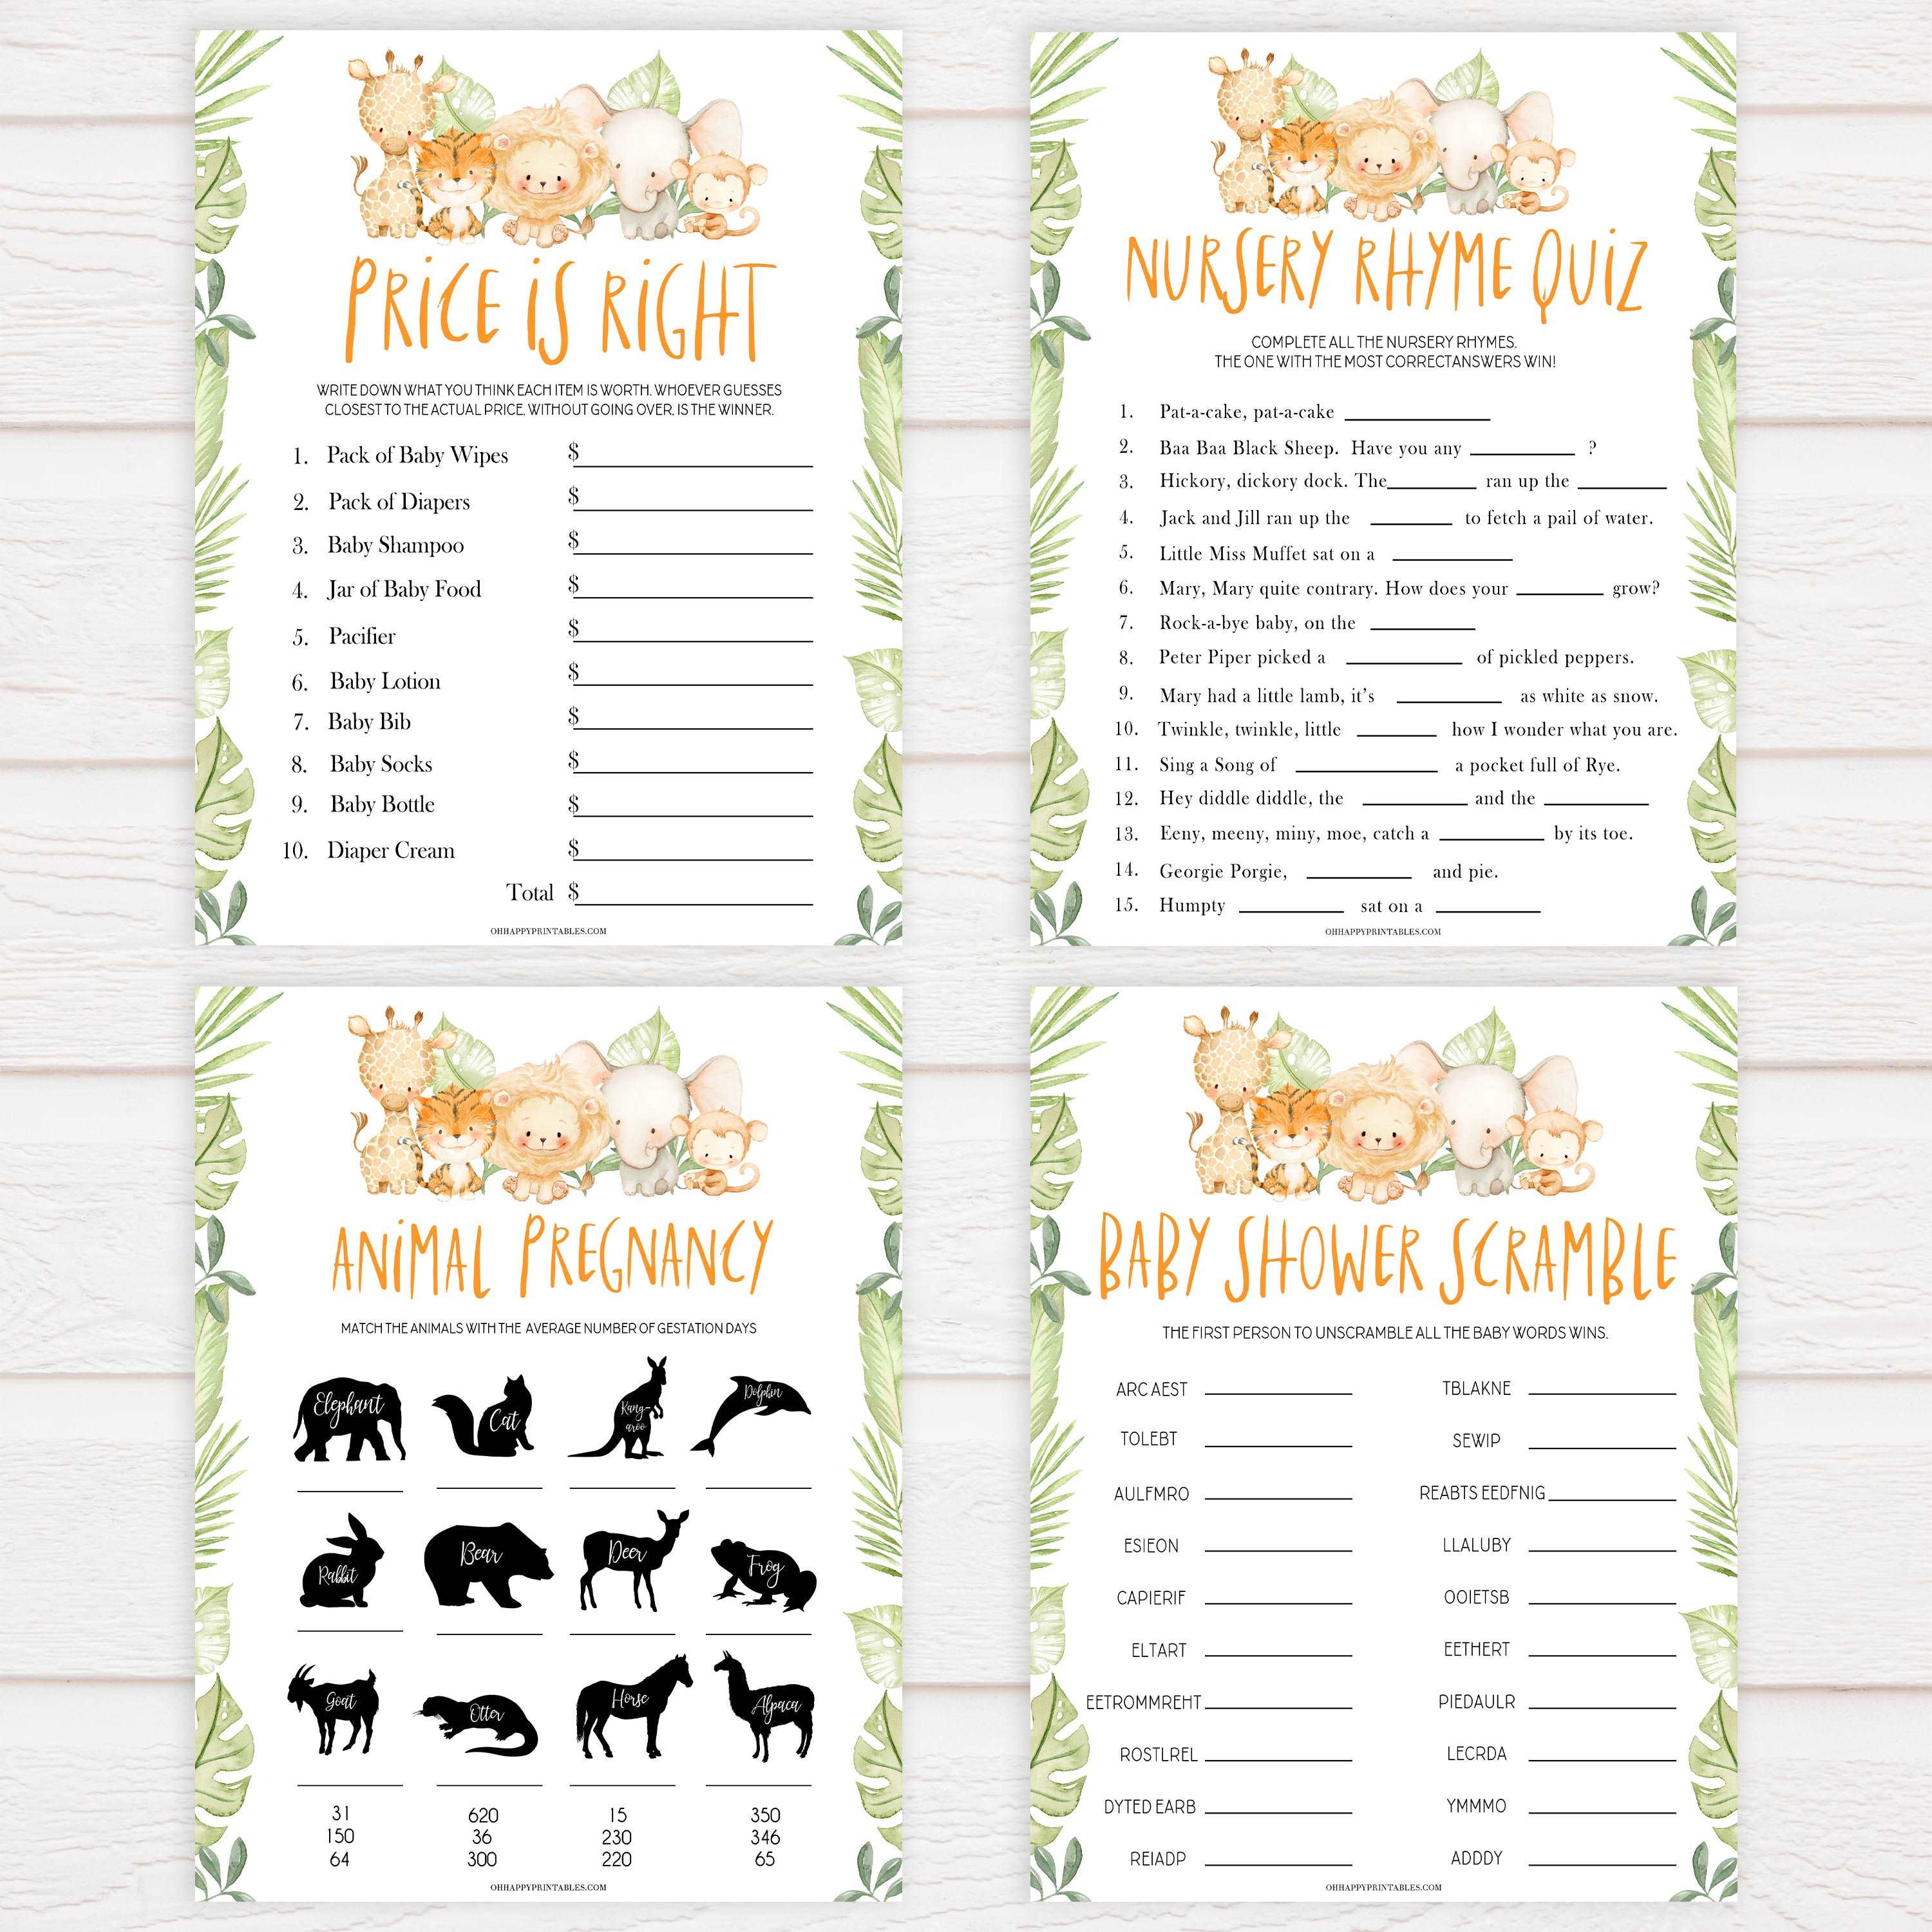 10 baby shower games, Printable baby shower games, safari animals baby games, baby shower games, fun baby shower ideas, top baby shower ideas, safari animals baby shower, baby shower games, fun baby shower ideas